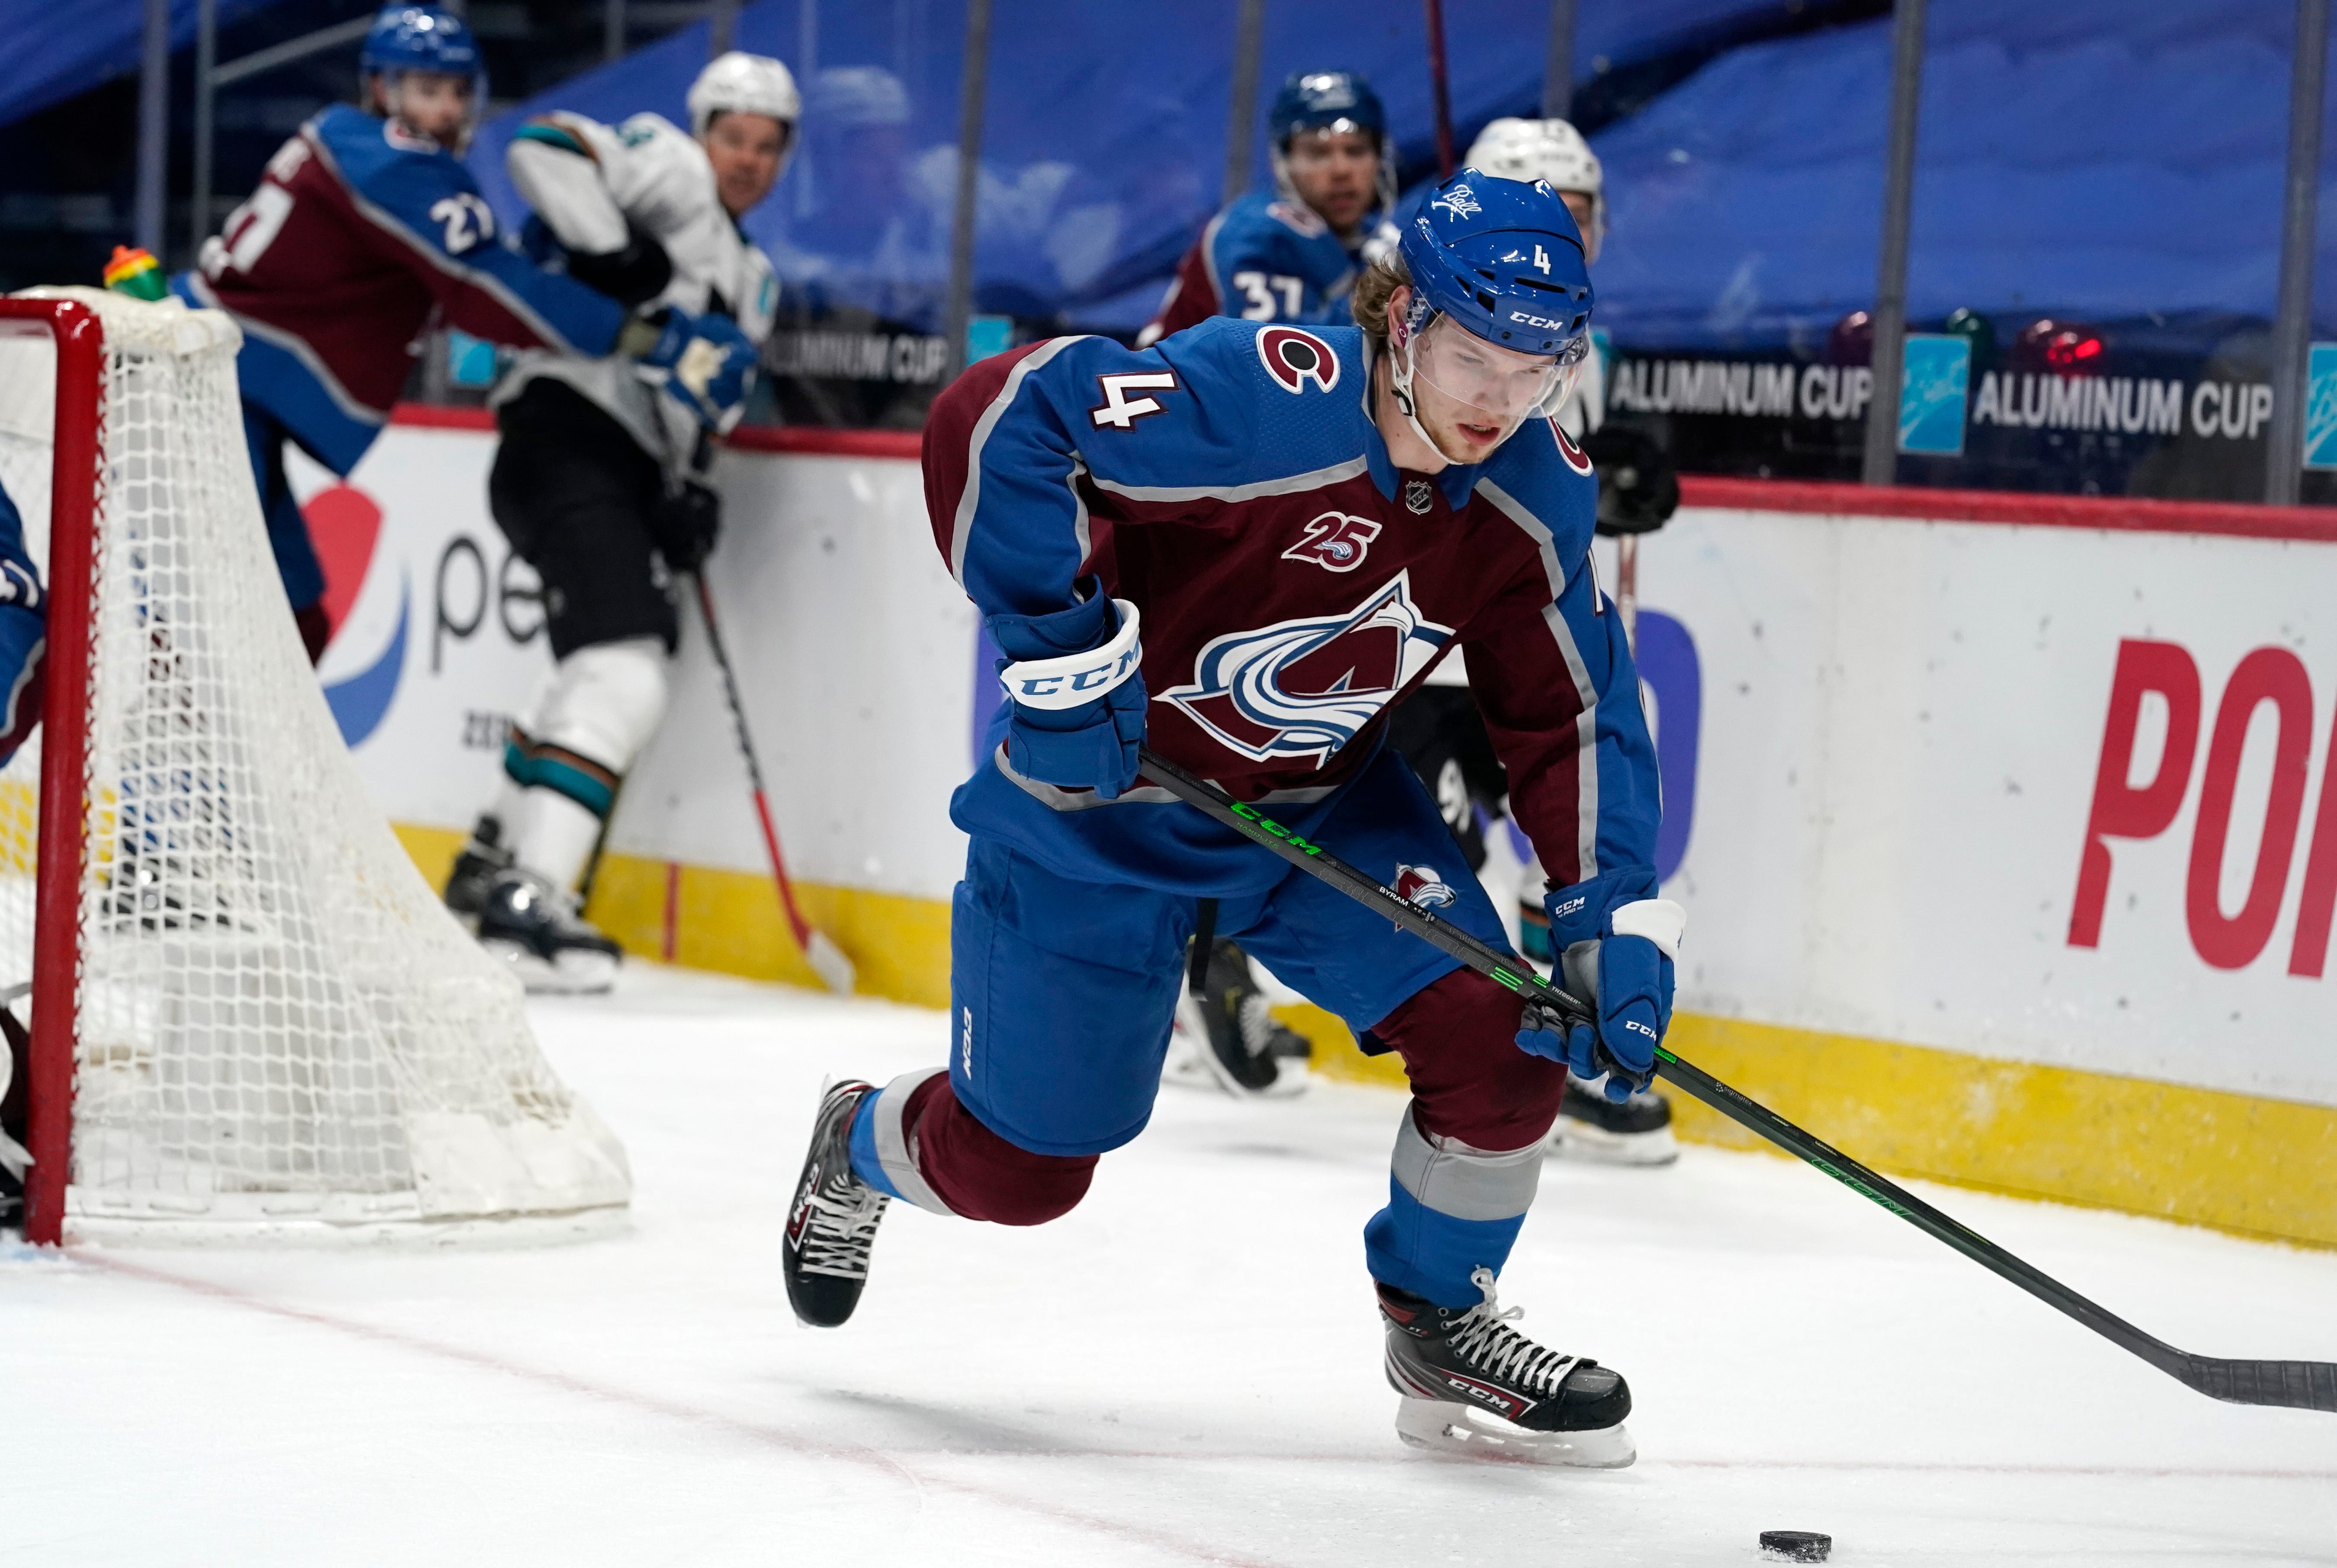 Avalanche's Bo Byram feels great heading into his first full NHL